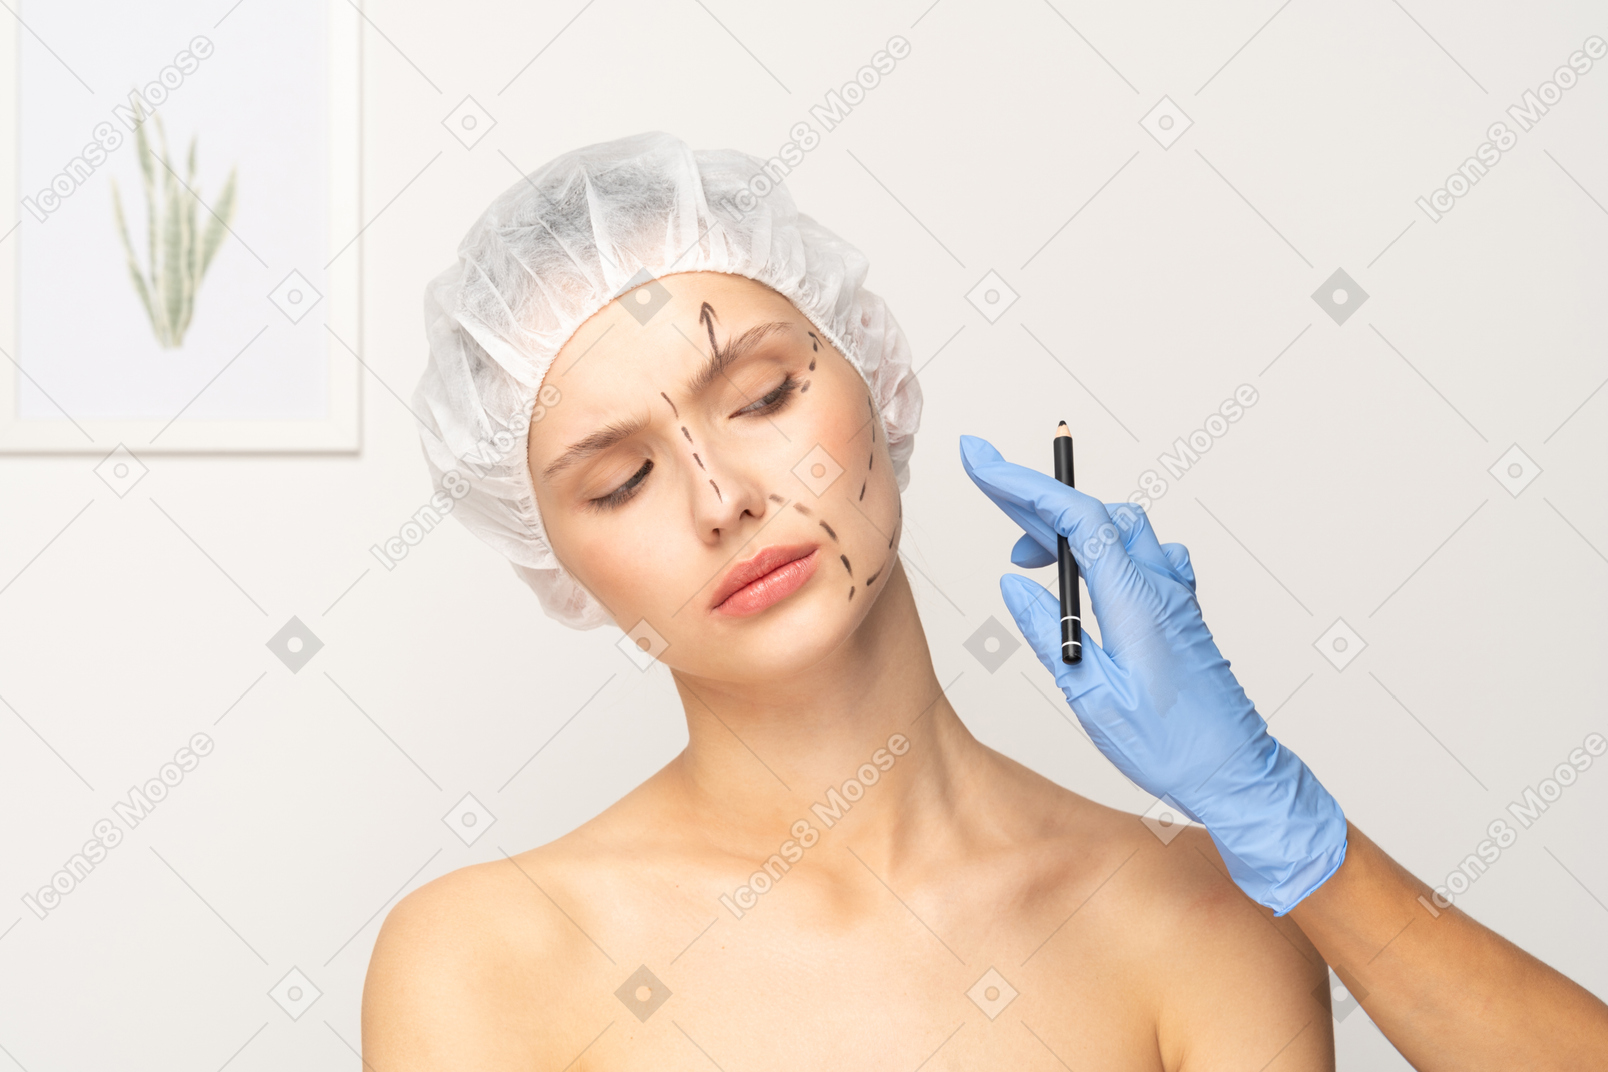 Young woman with face markings preparing for surgery